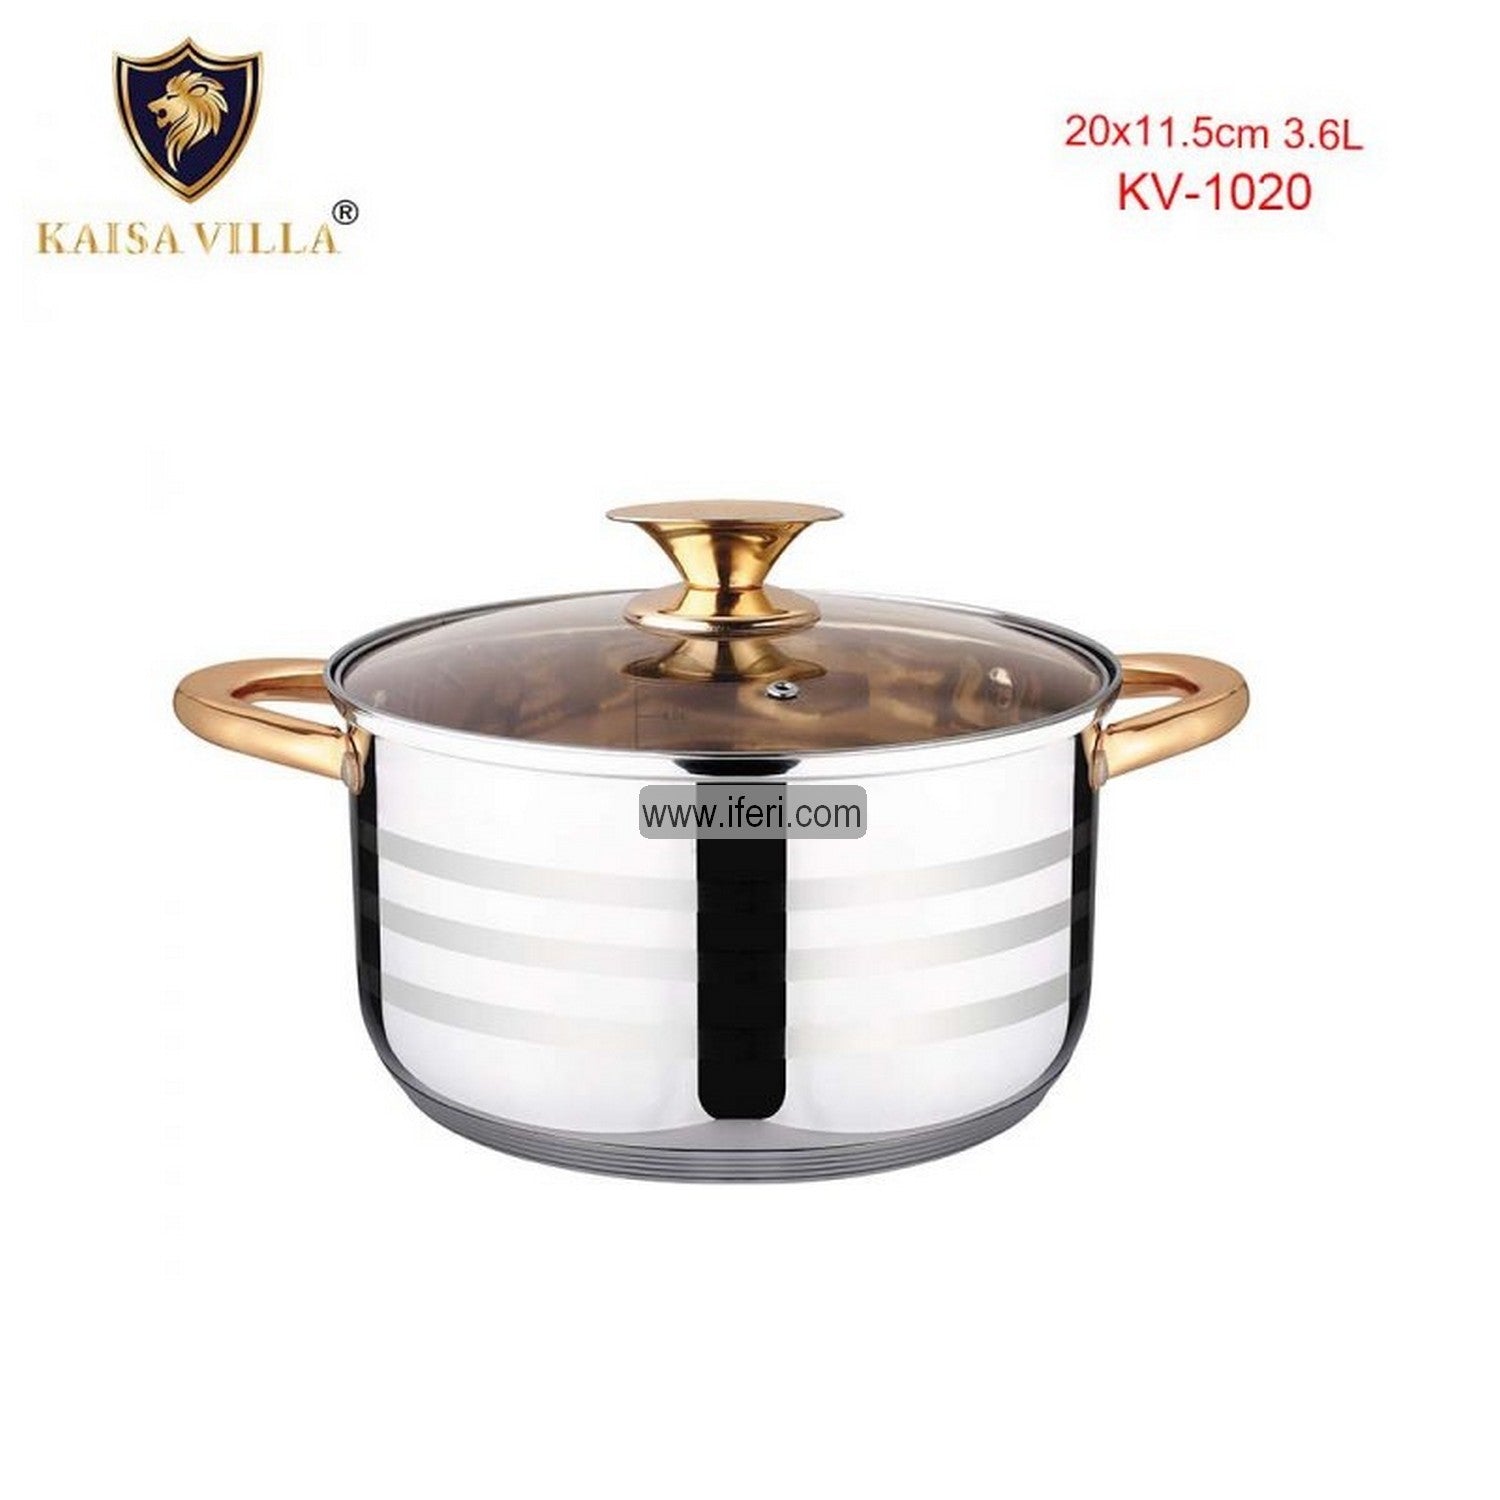 20cm Kaisa Villa Stainless Steel Cookware with Lid KV-1020